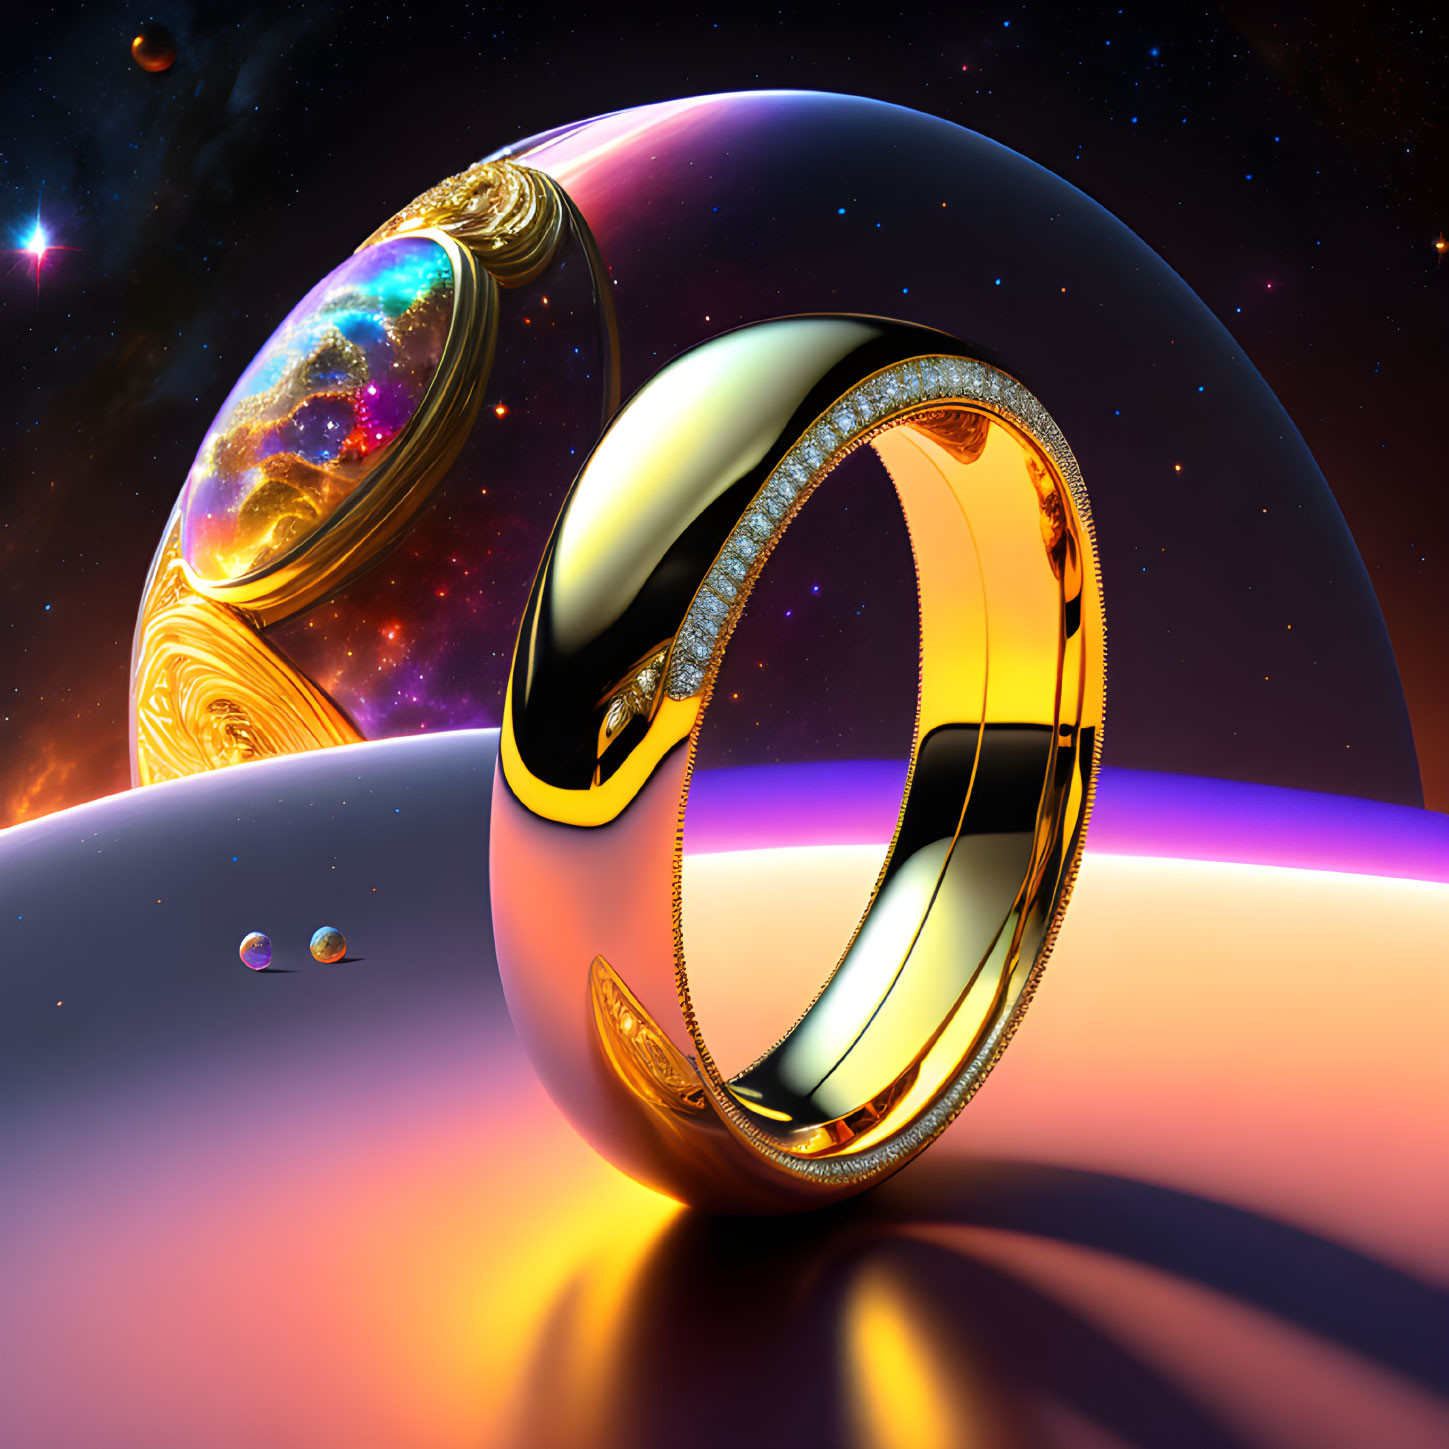 Surreal metallic rings over colorful alien landscape with cosmic backdrop